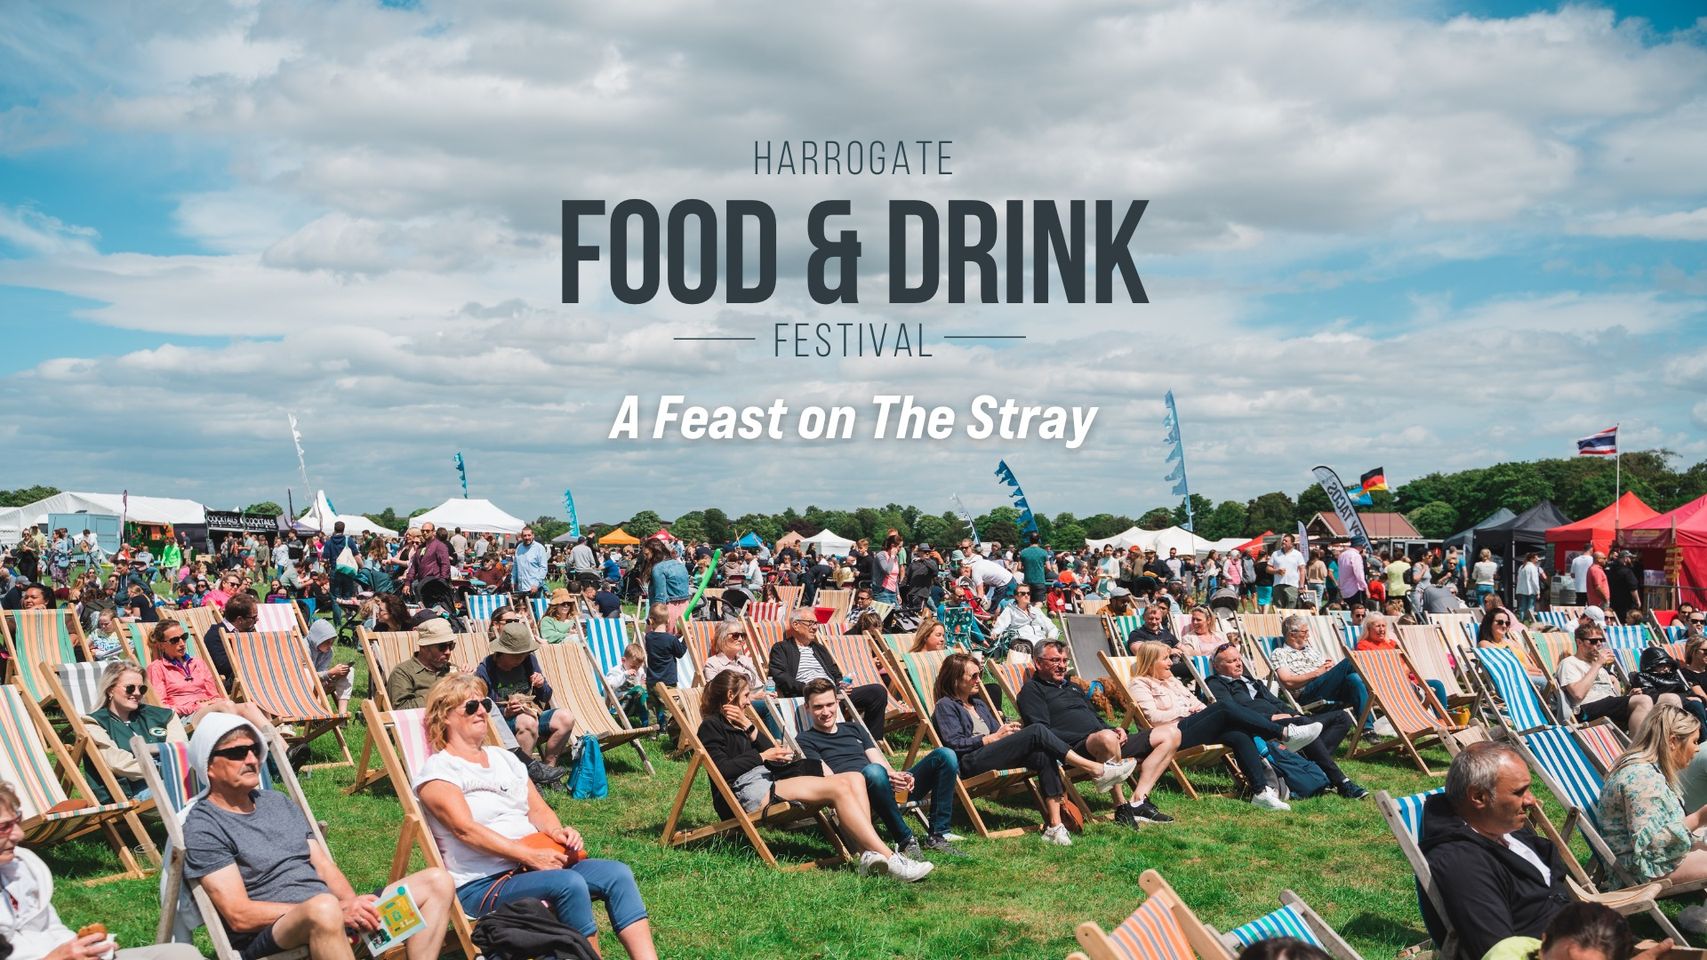 Image name harrogate food and drink festival on the stray yorkshire the 9 image from the post Harrogate Food & Drink Festival 2023: A Feast on The Stray in Yorkshire.com.